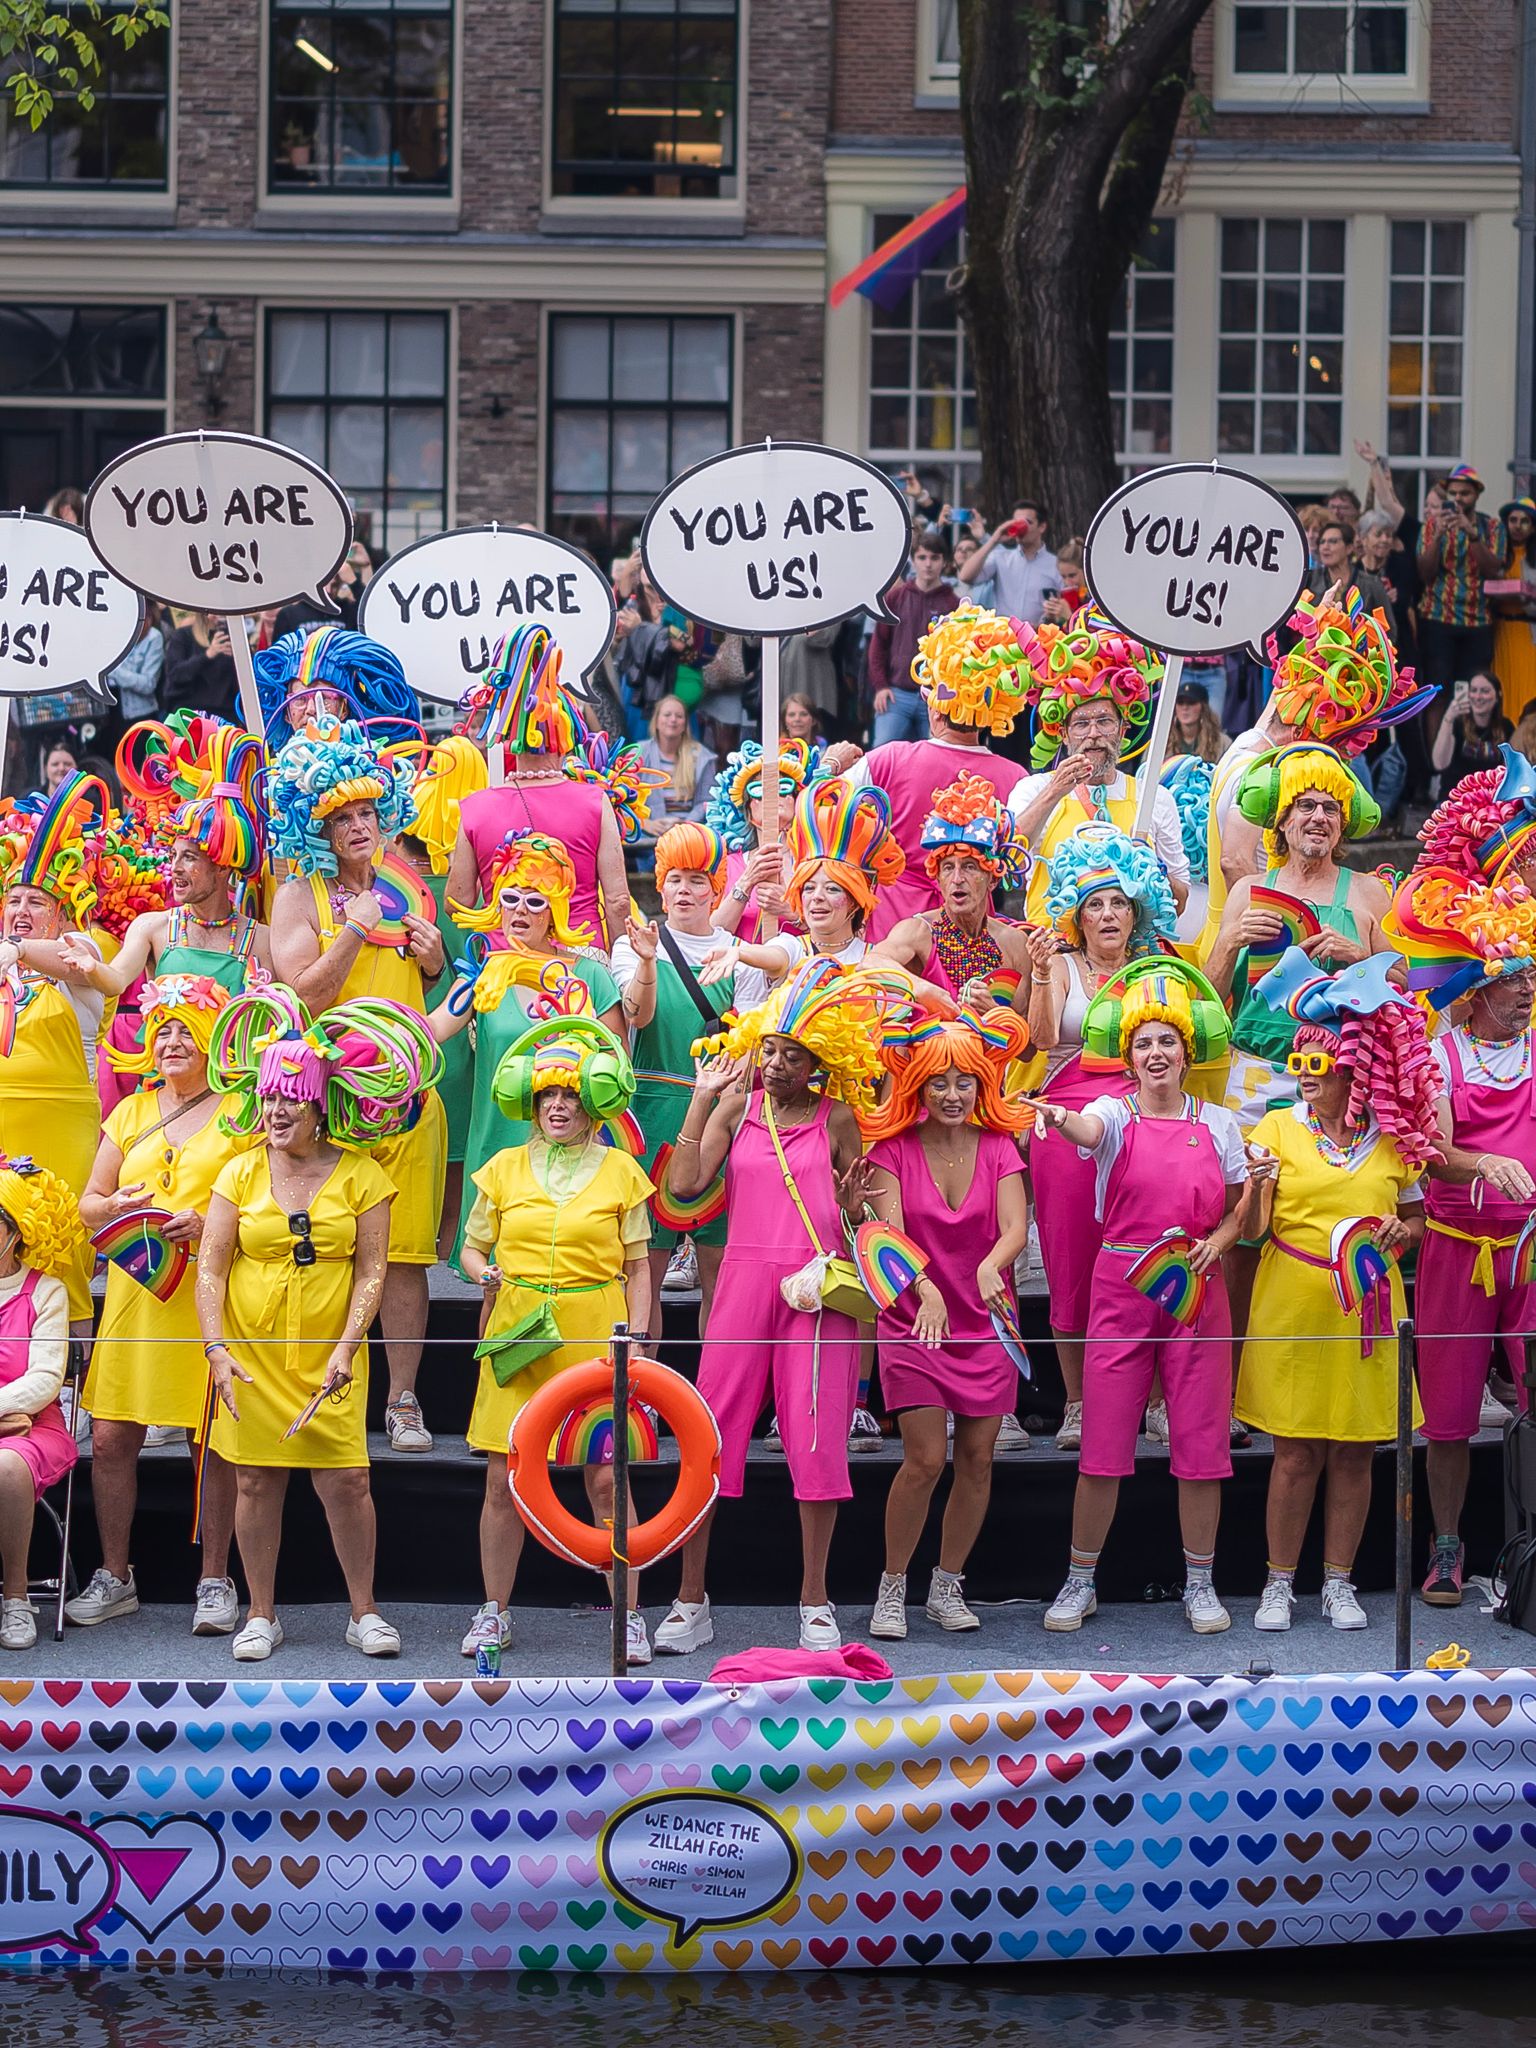 The Pride Parade is Amsterdam's second-largest event of the year, celebrating the LGBTQ+ community. This float, and others like it, share the vision that all people are welcome to experience family